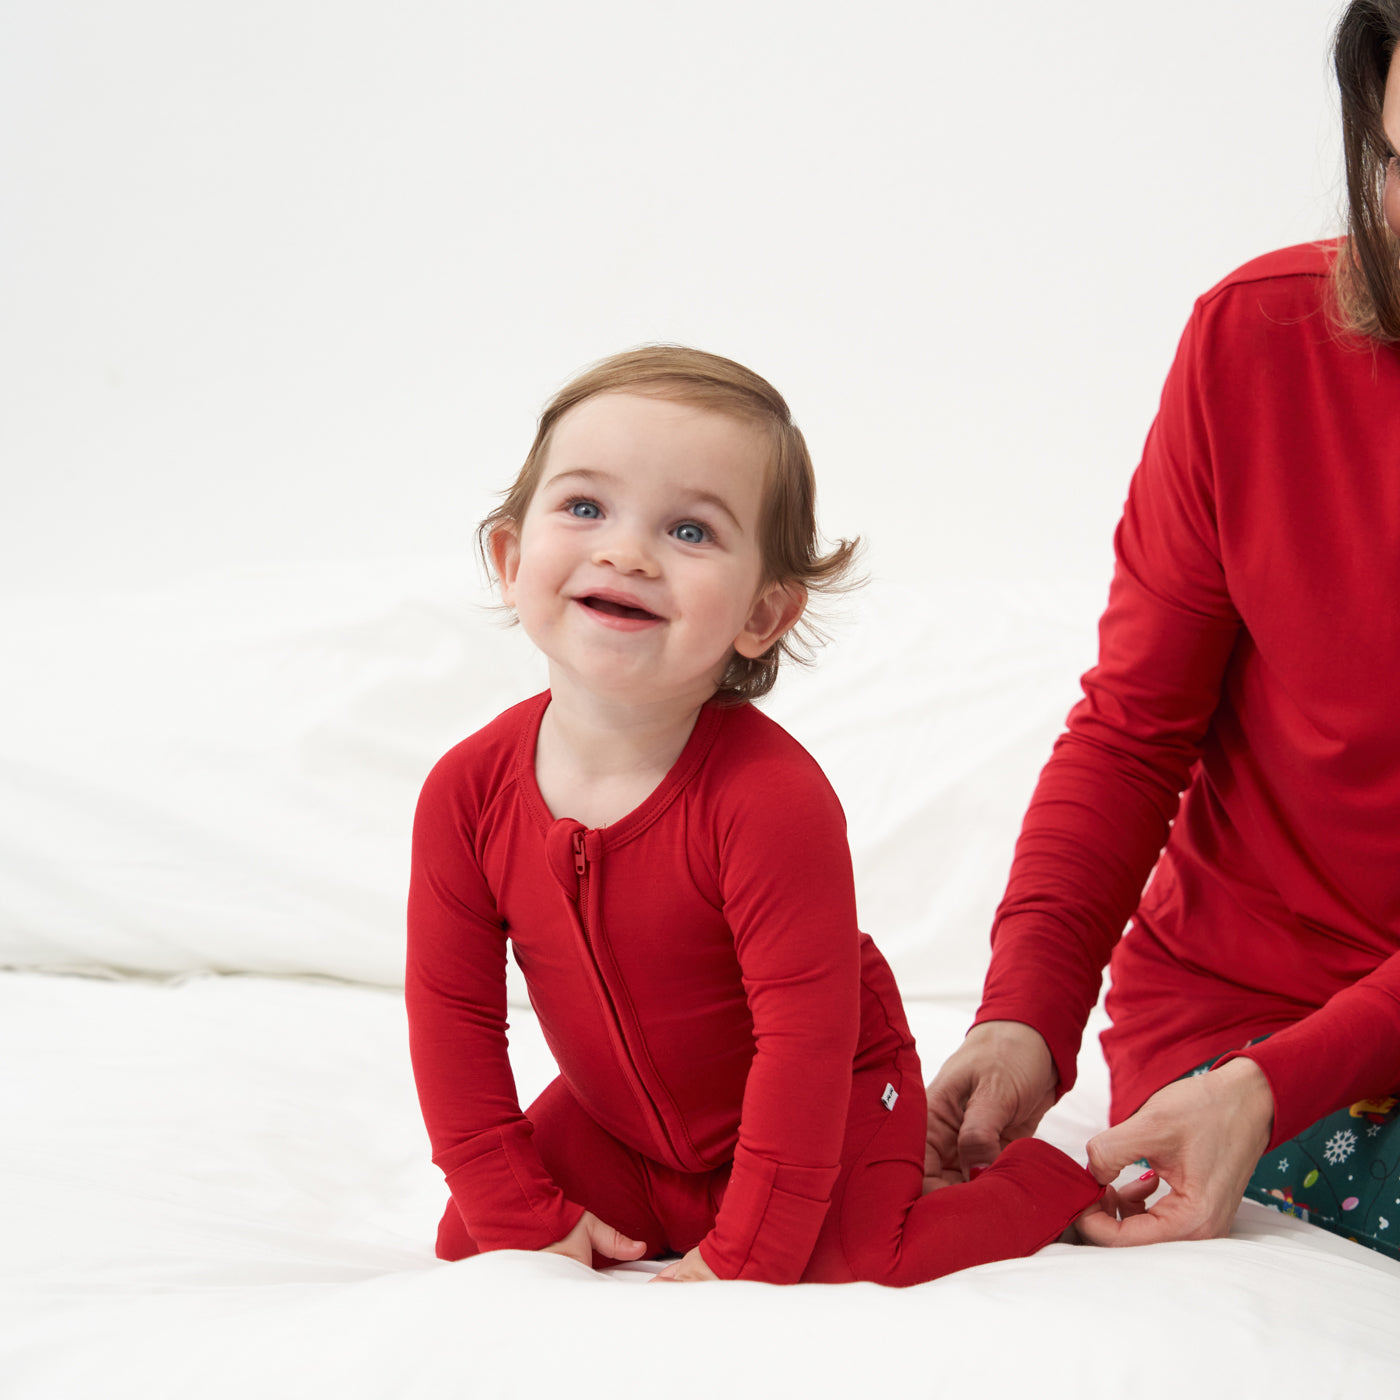 Alternate image of a mother and child sitting on a bed wearing matching holiday pajamas